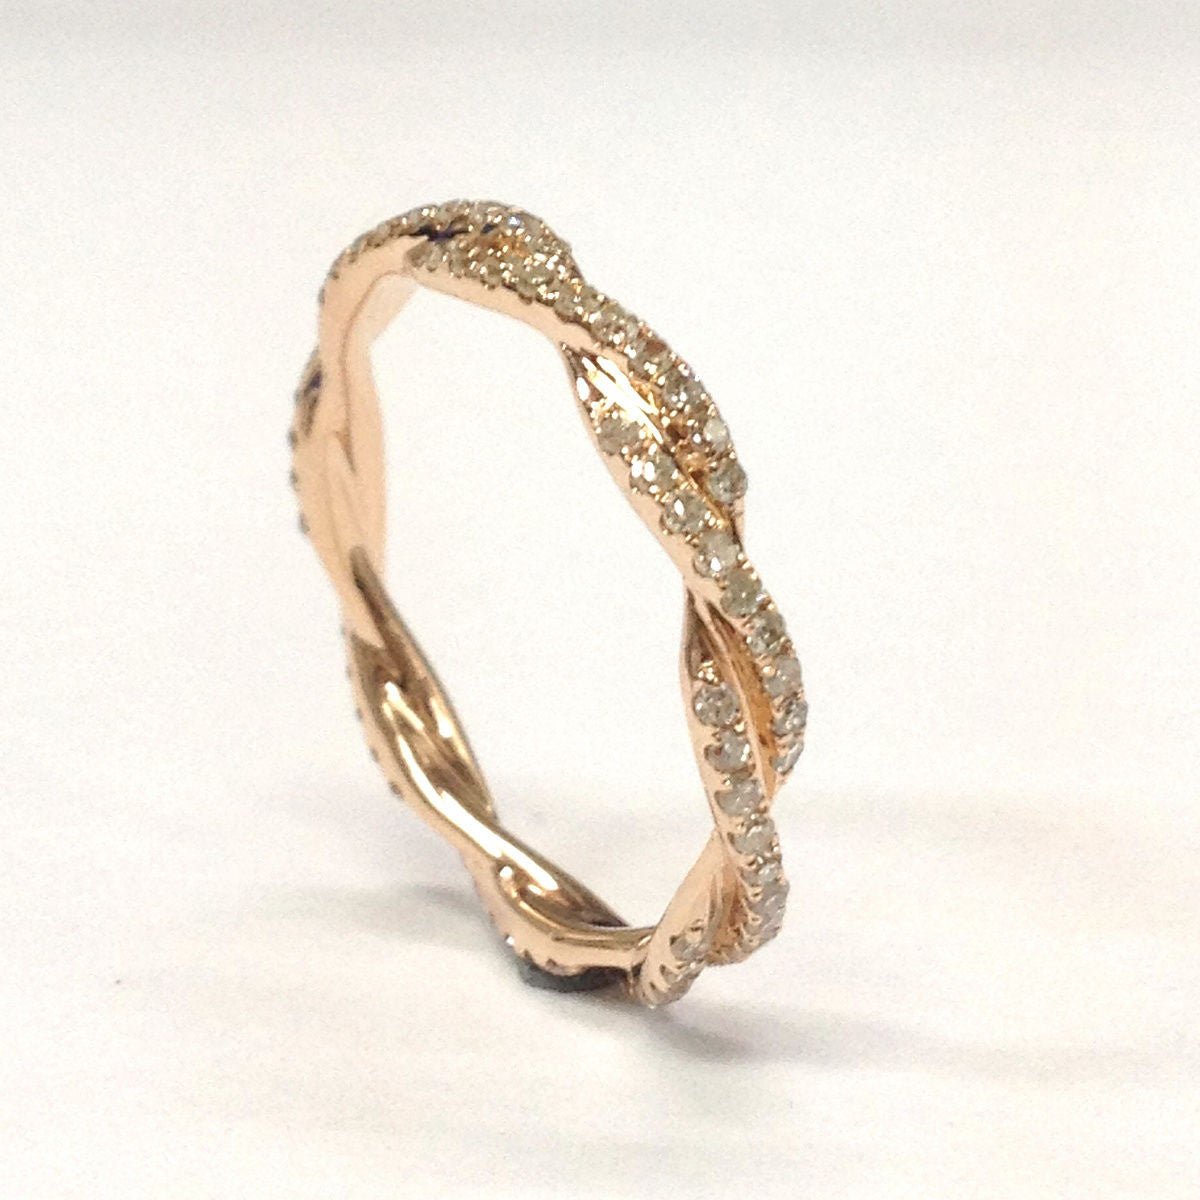 Pave-Set Diamond Twisted Wedding Band Eternity Ring 14K Rose Gold - Lord of Gem Rings